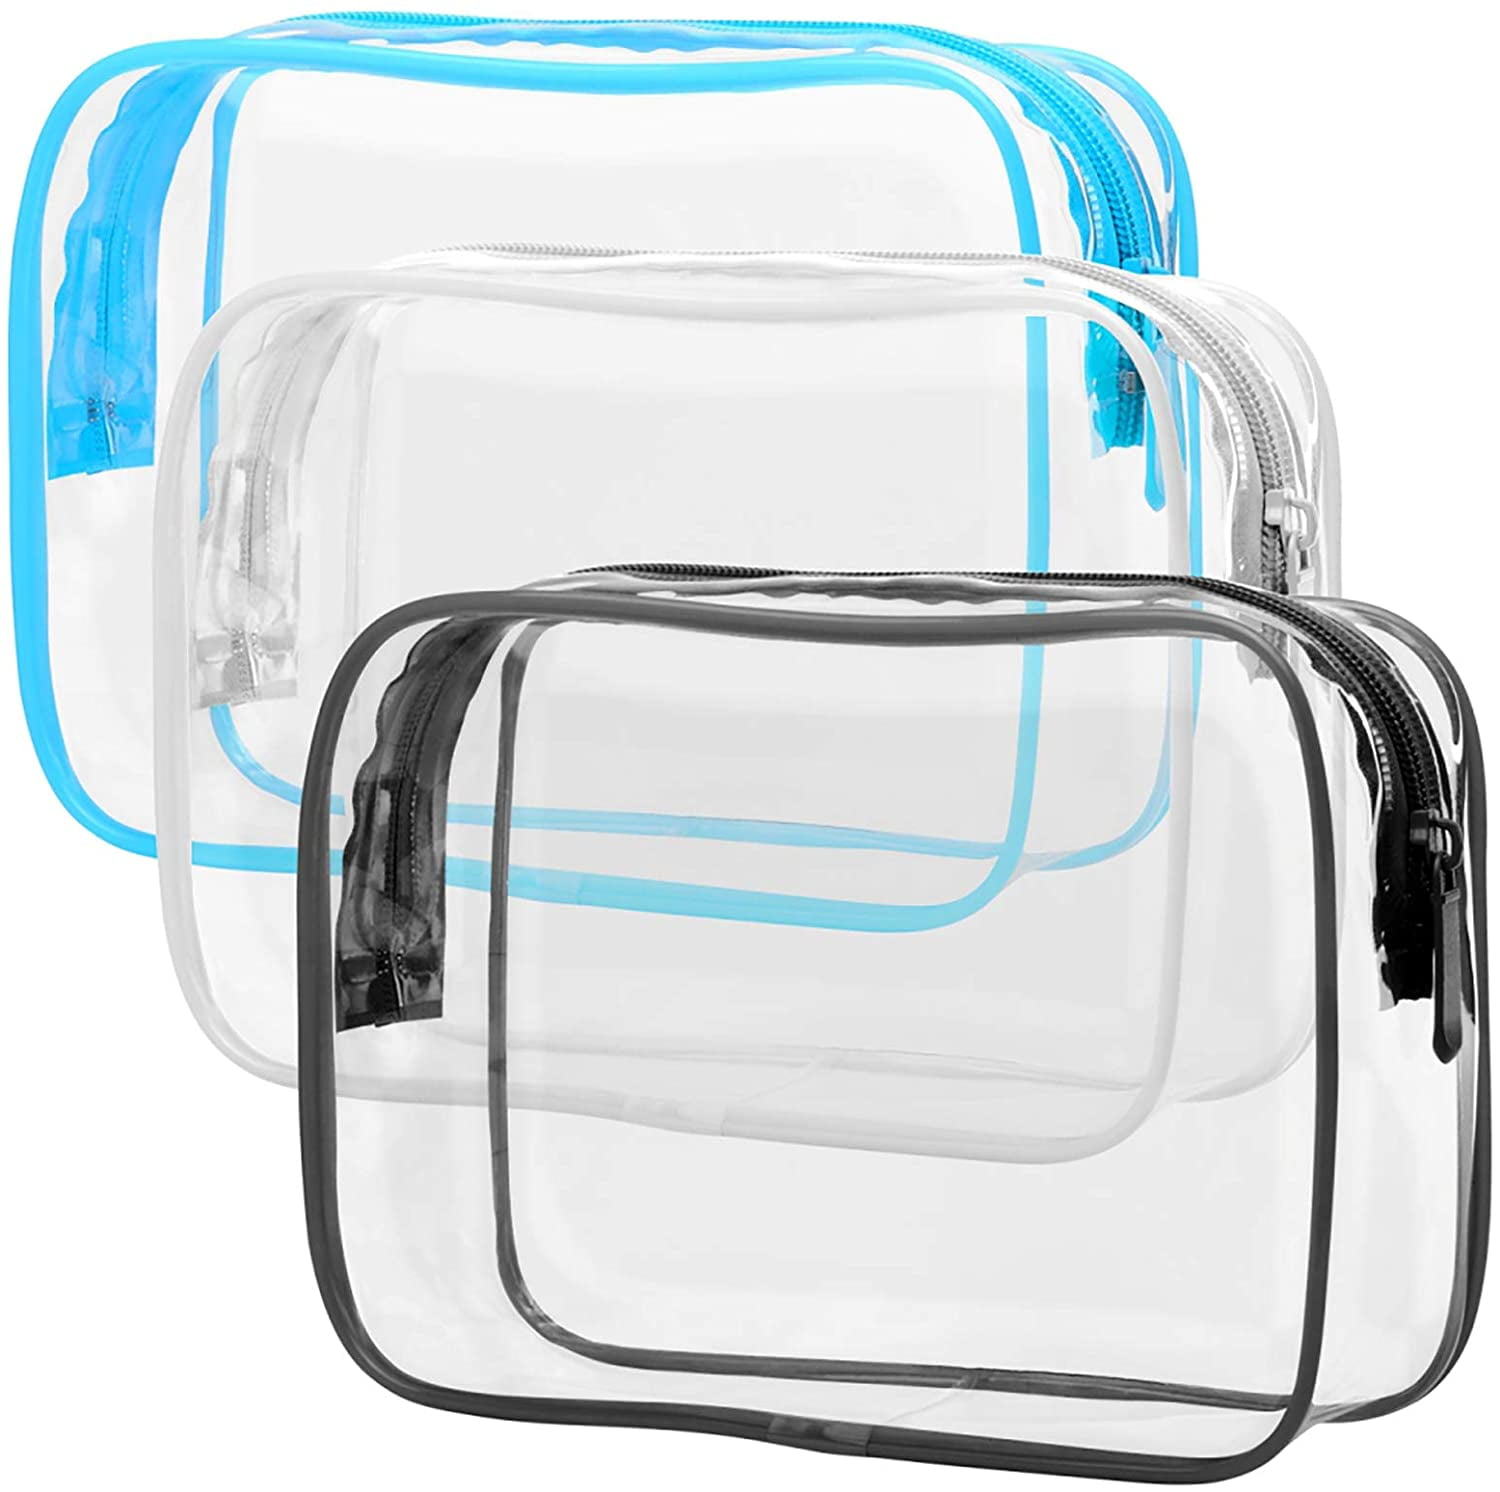 Ogato 3pcs - Clear TSA Approved Toiletry Bag - Our Quart Size Clear  Toiletry Bags are Security Approved Worldwide for Liquids & Cosmetics -  100% 3-1-1 Compliant Clear Travel Bags for Toiletries Black